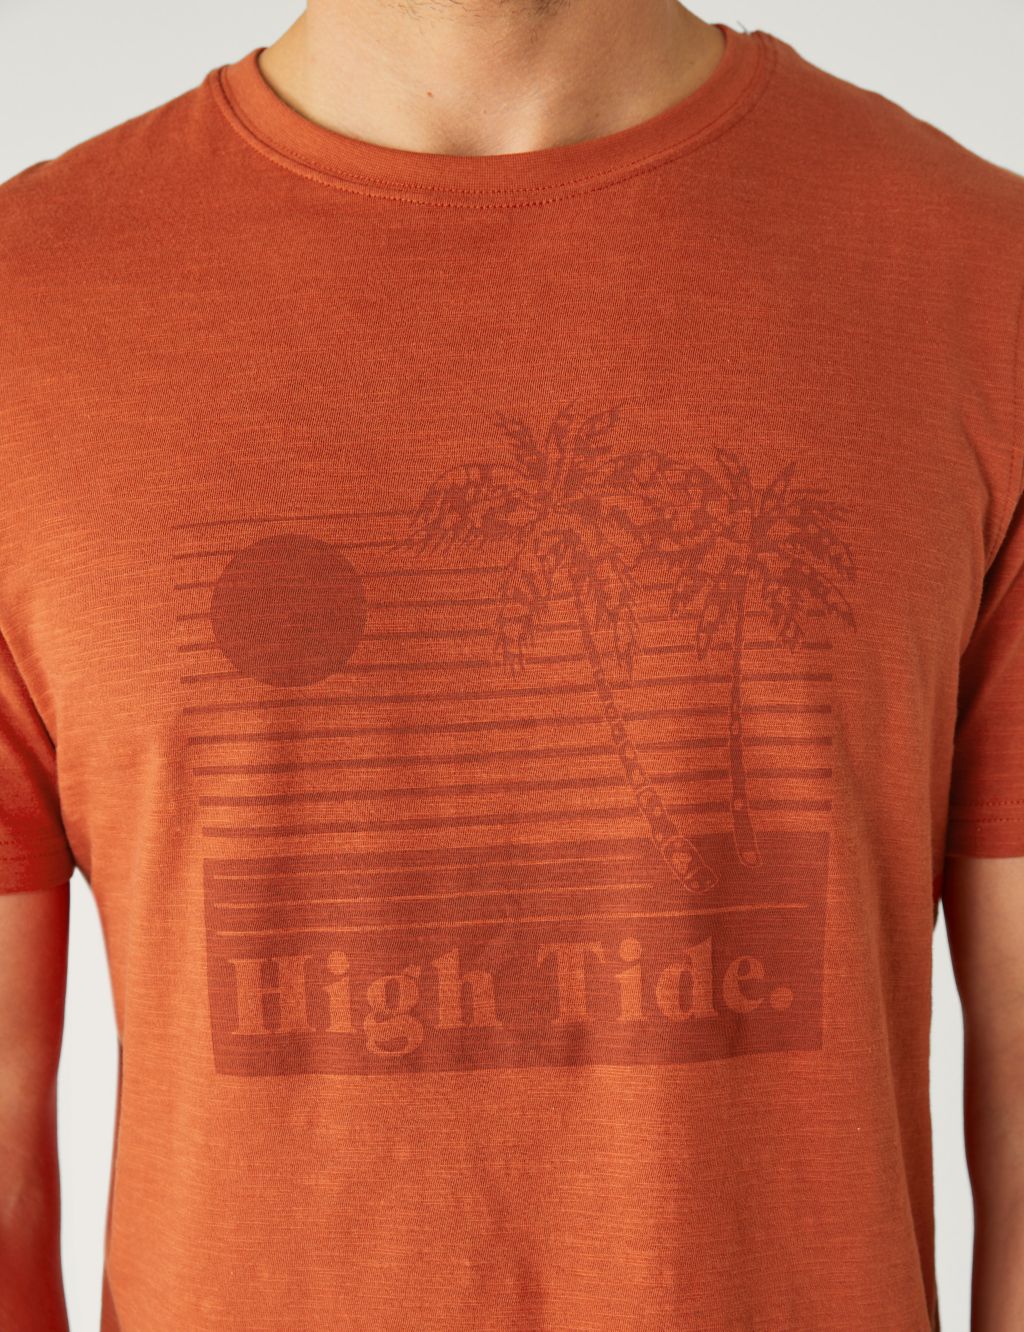 Pure Cotton High Tide Graphic T-Shirt image 2